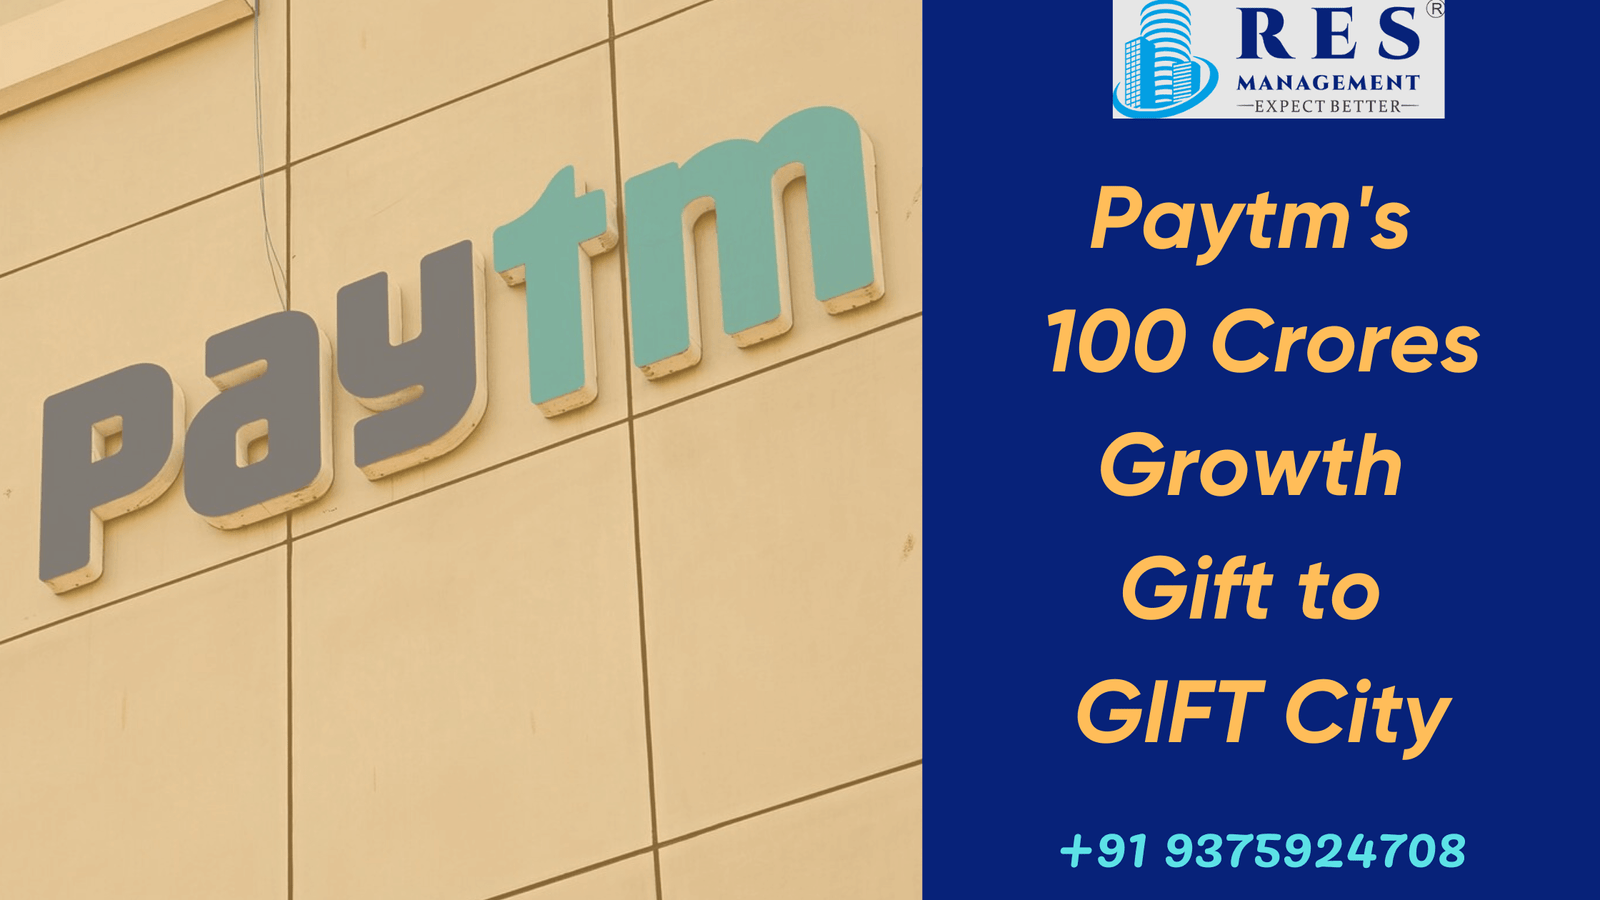 LOOT) (Working multiple times) Paytm - Google Play store gift card : Get  Rs.25 cashback on buying Google Play store gift card